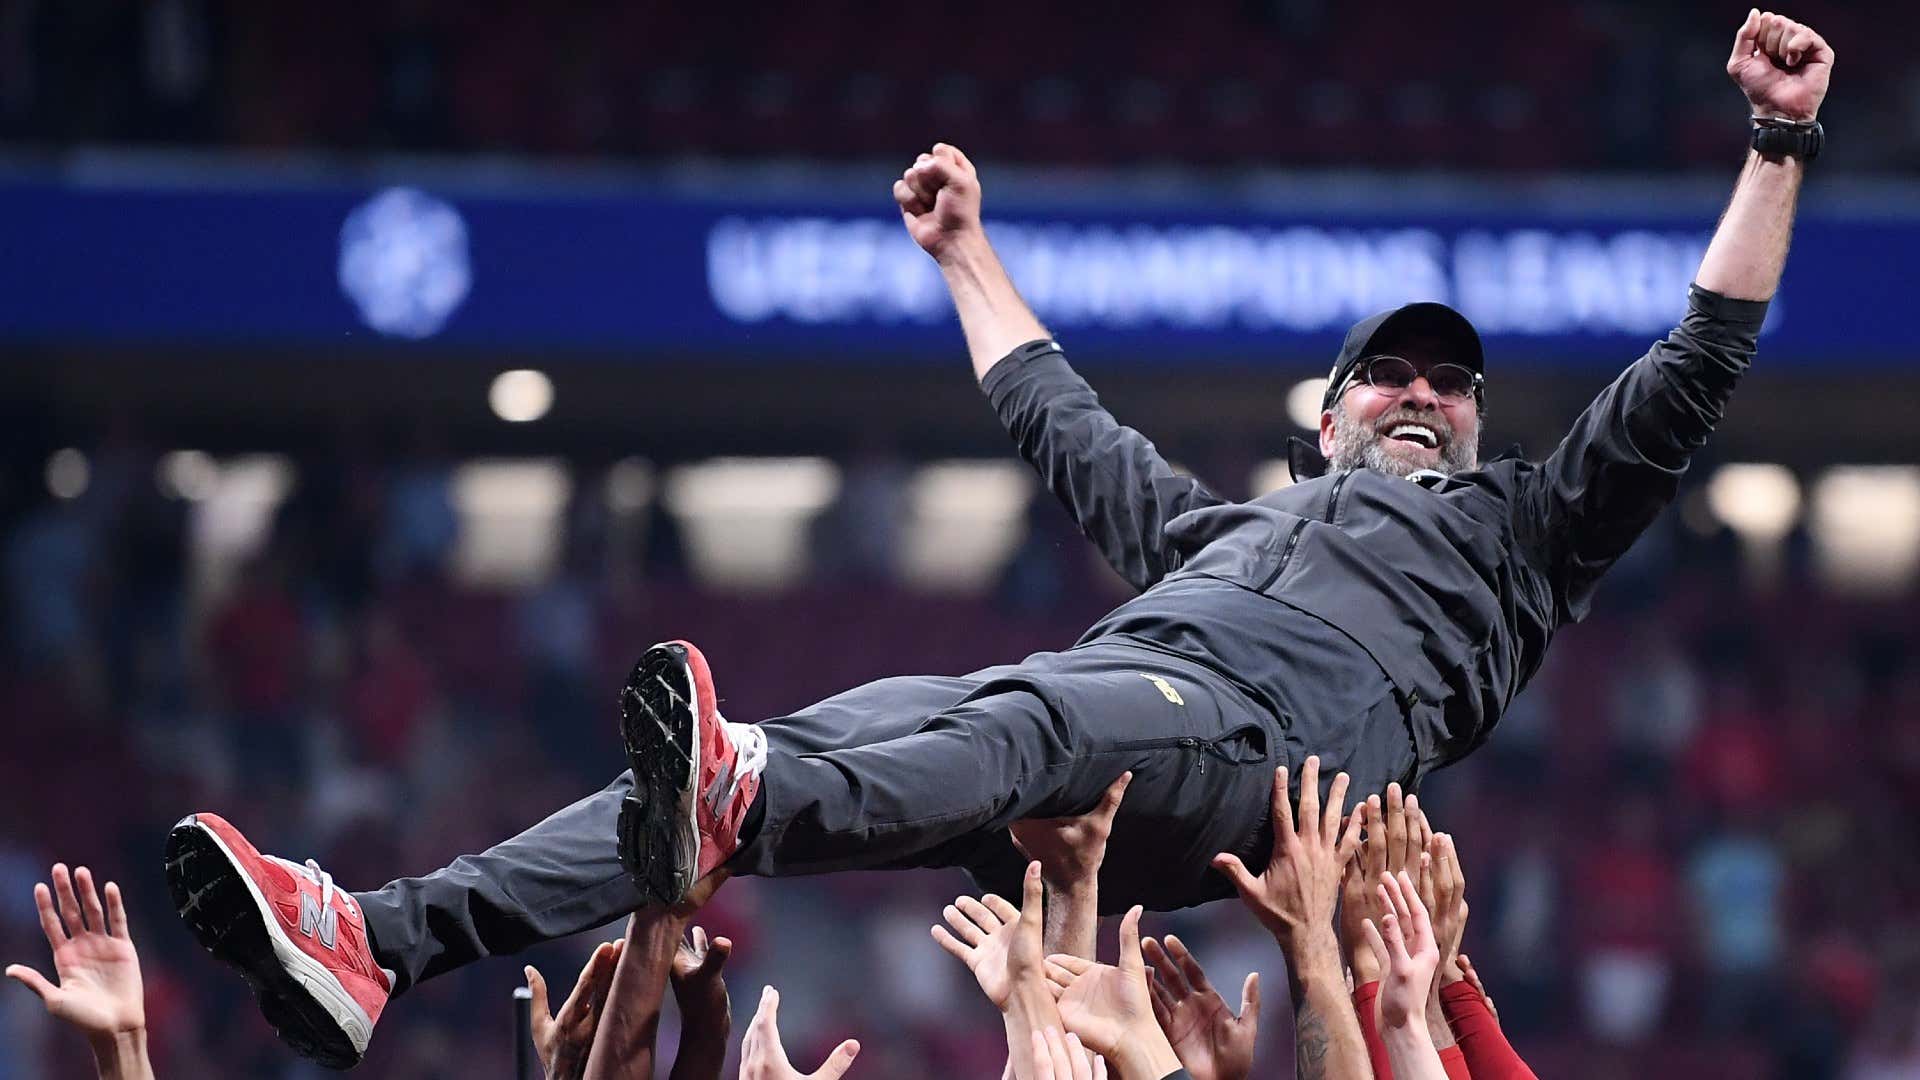 Jurgen Klopp, Manager of Liverpool is thrown in the air as he celebrates with his players and staff after winningduring the UEFA Champions League Final 